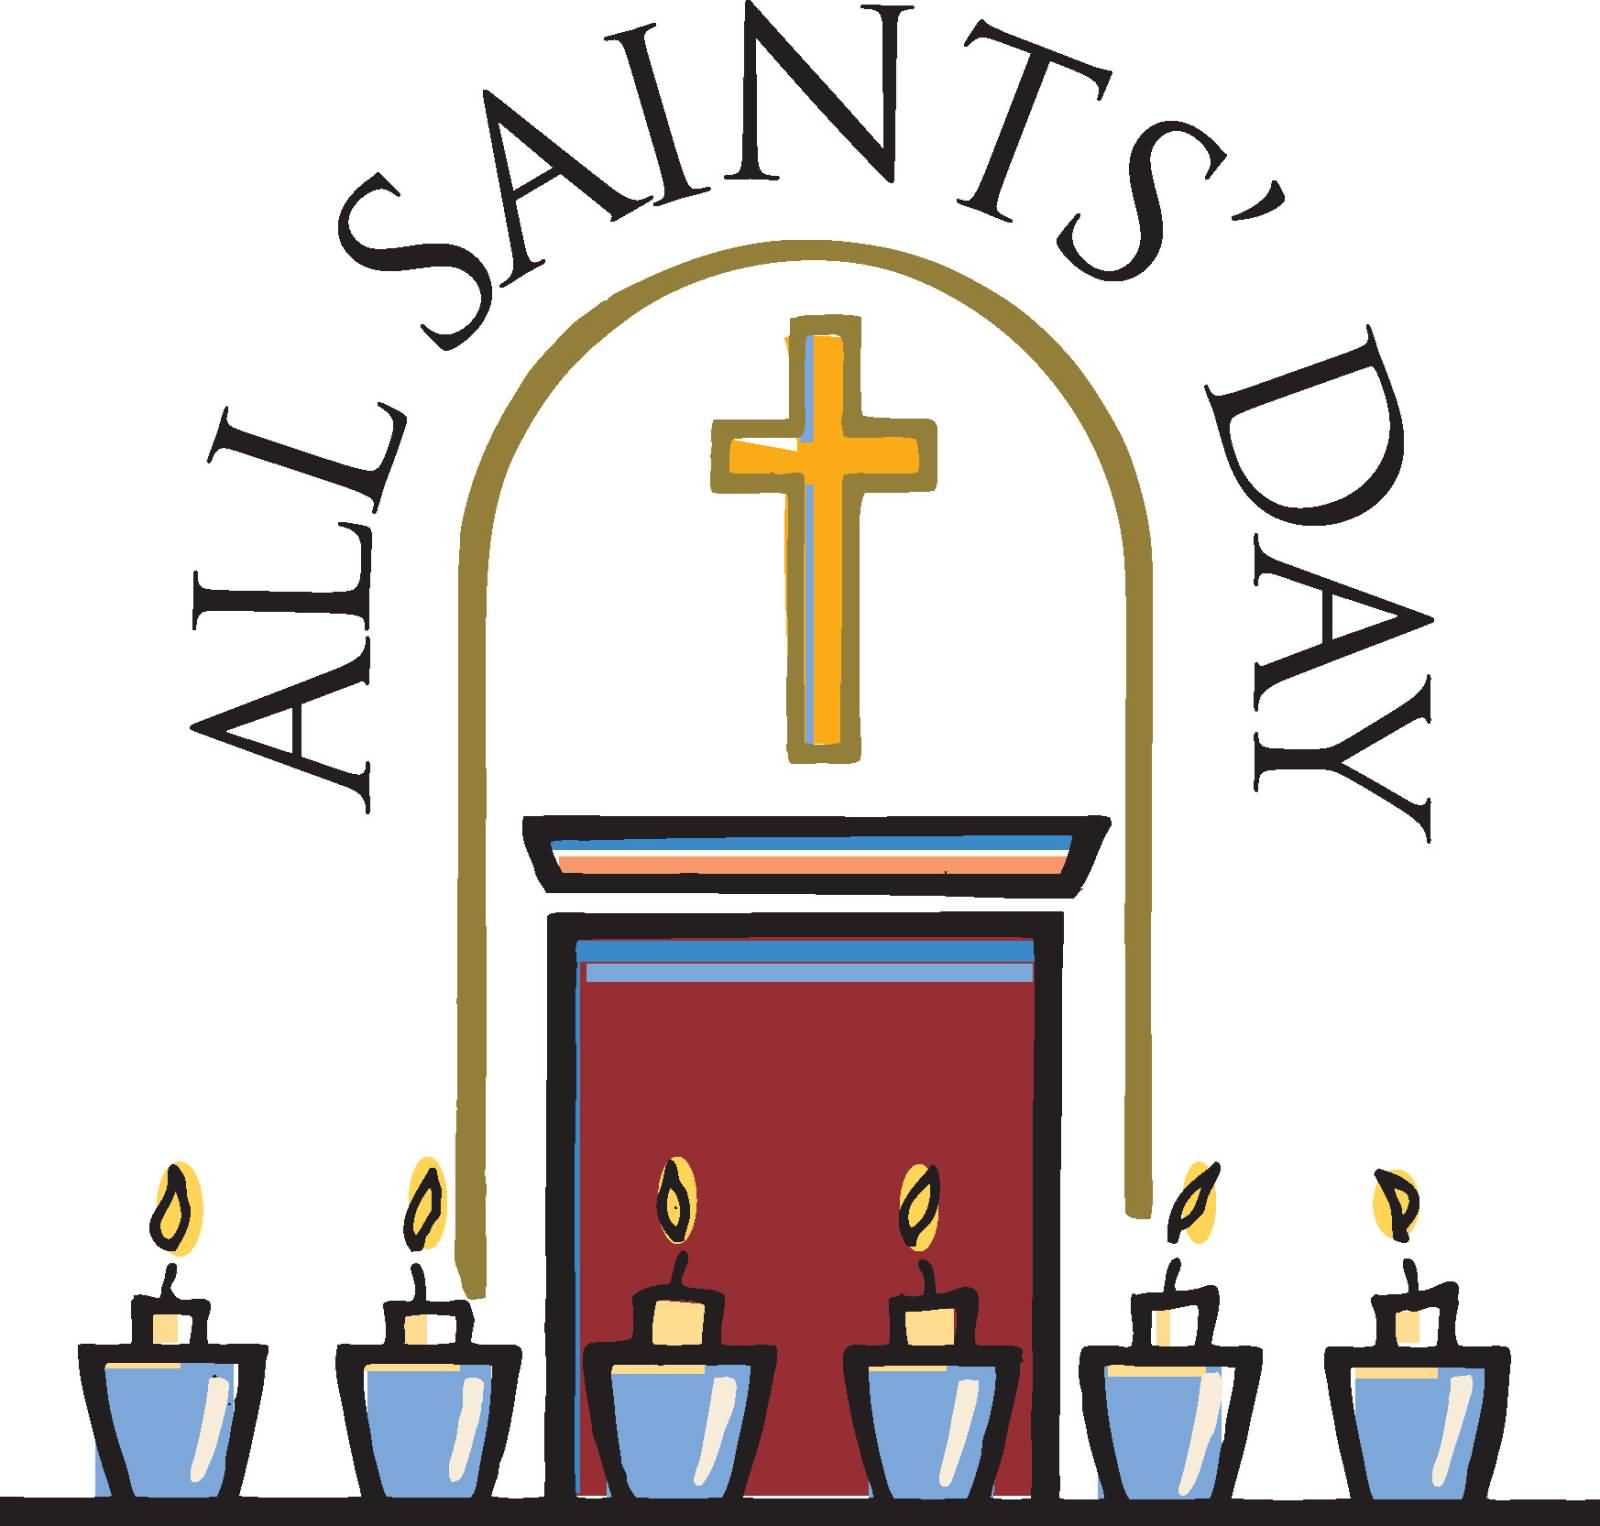 all-saints-day-2019-facts-prayers-meaning-images-and-traditions